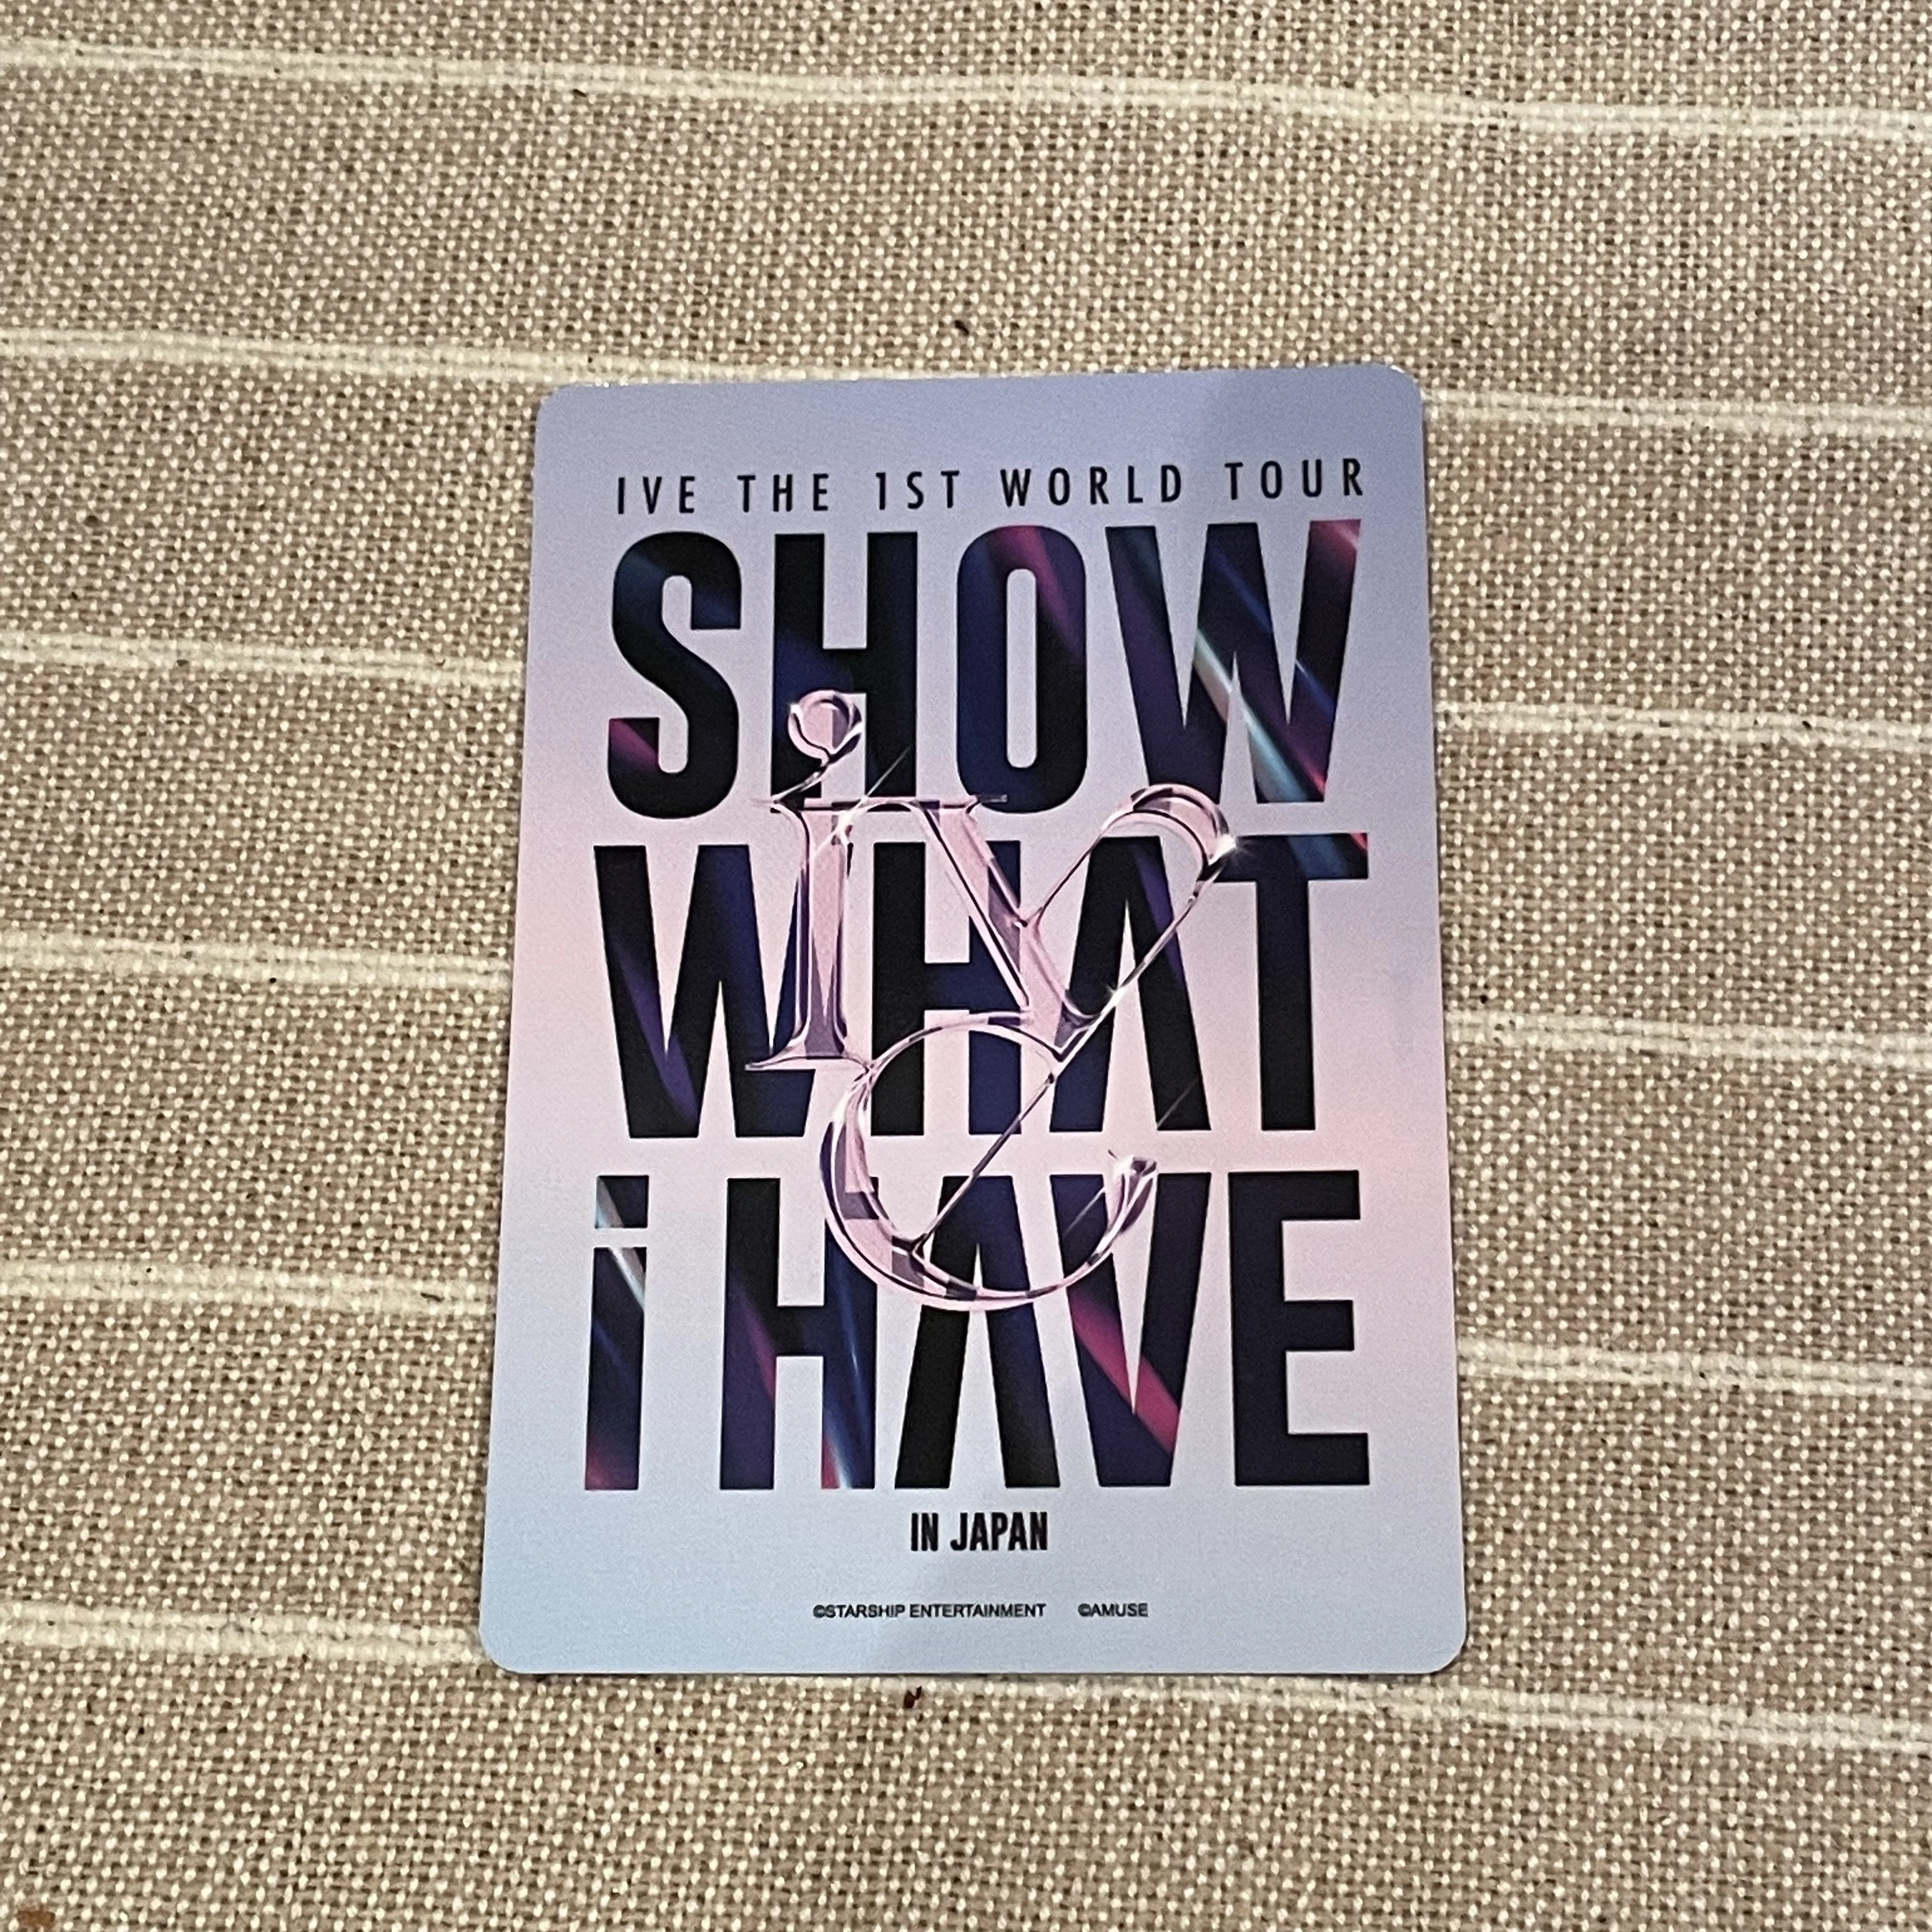 【Kアリーナ横浜】IVE THE 1ST WORLD TOUR ‘SHOW WHAT I HAVE’ JAPAN （ネタバレなし）_1_3-2